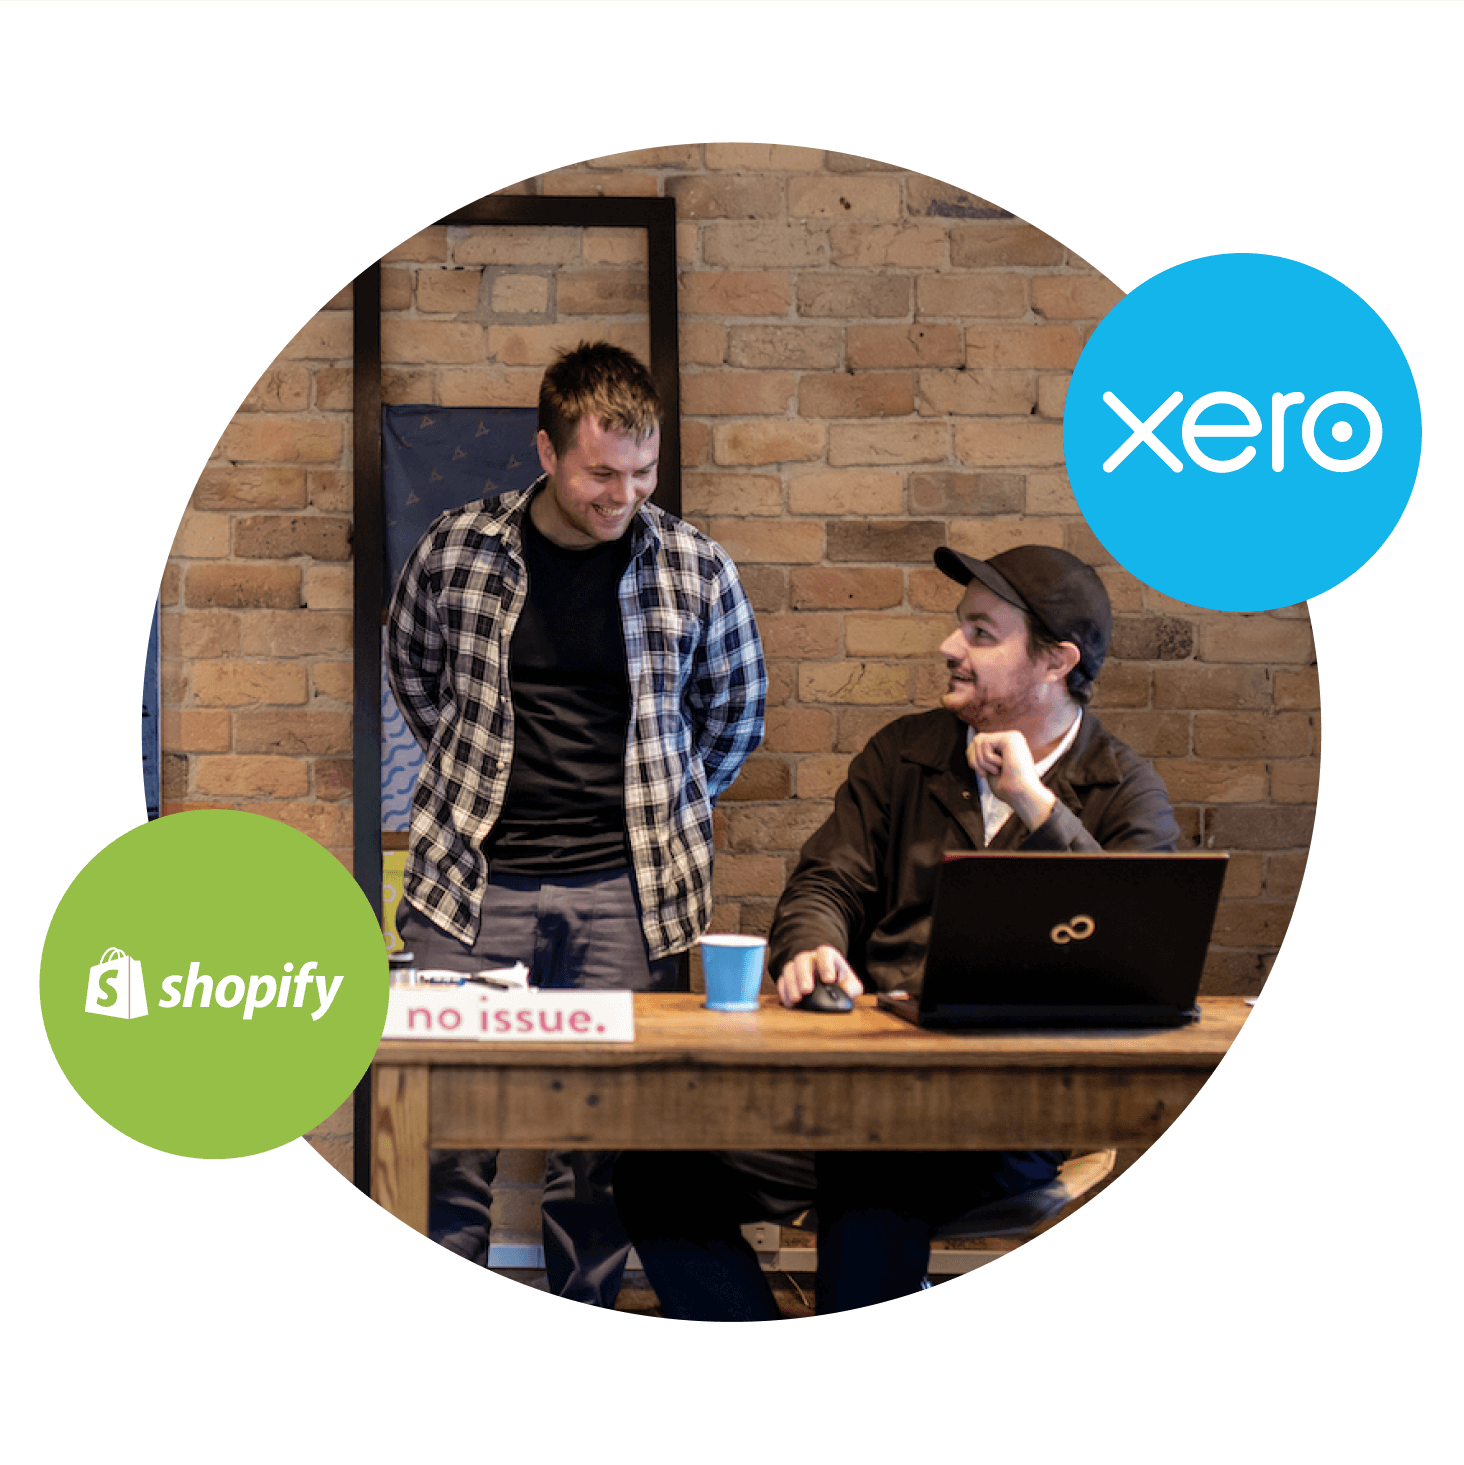 Two Philippine ecommerce sellers chat about the increase in sales since using Shopify and Xero for their online store.